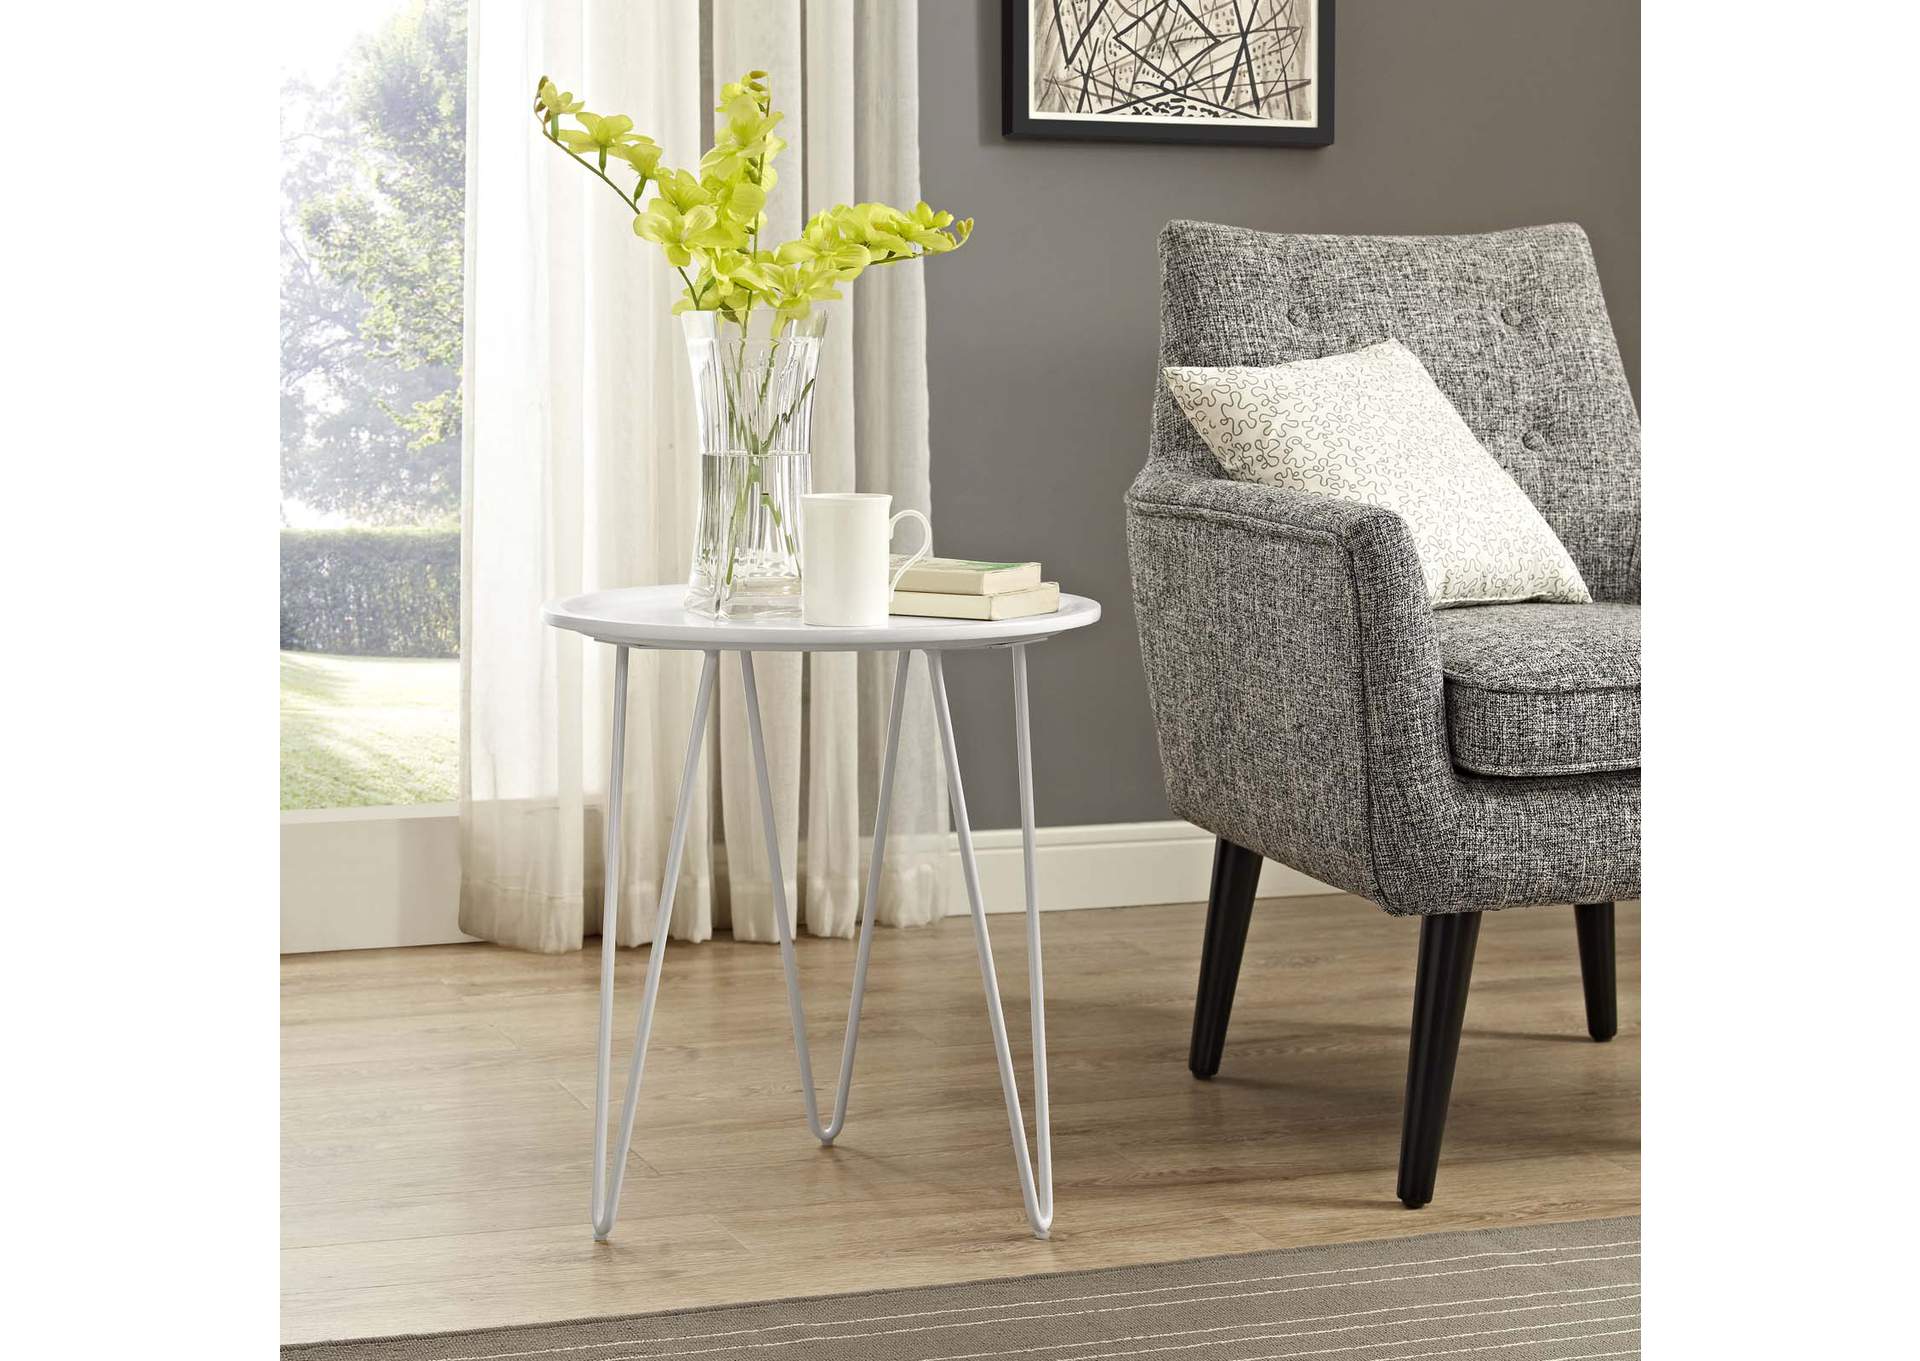 White Digress Side Table,Modway